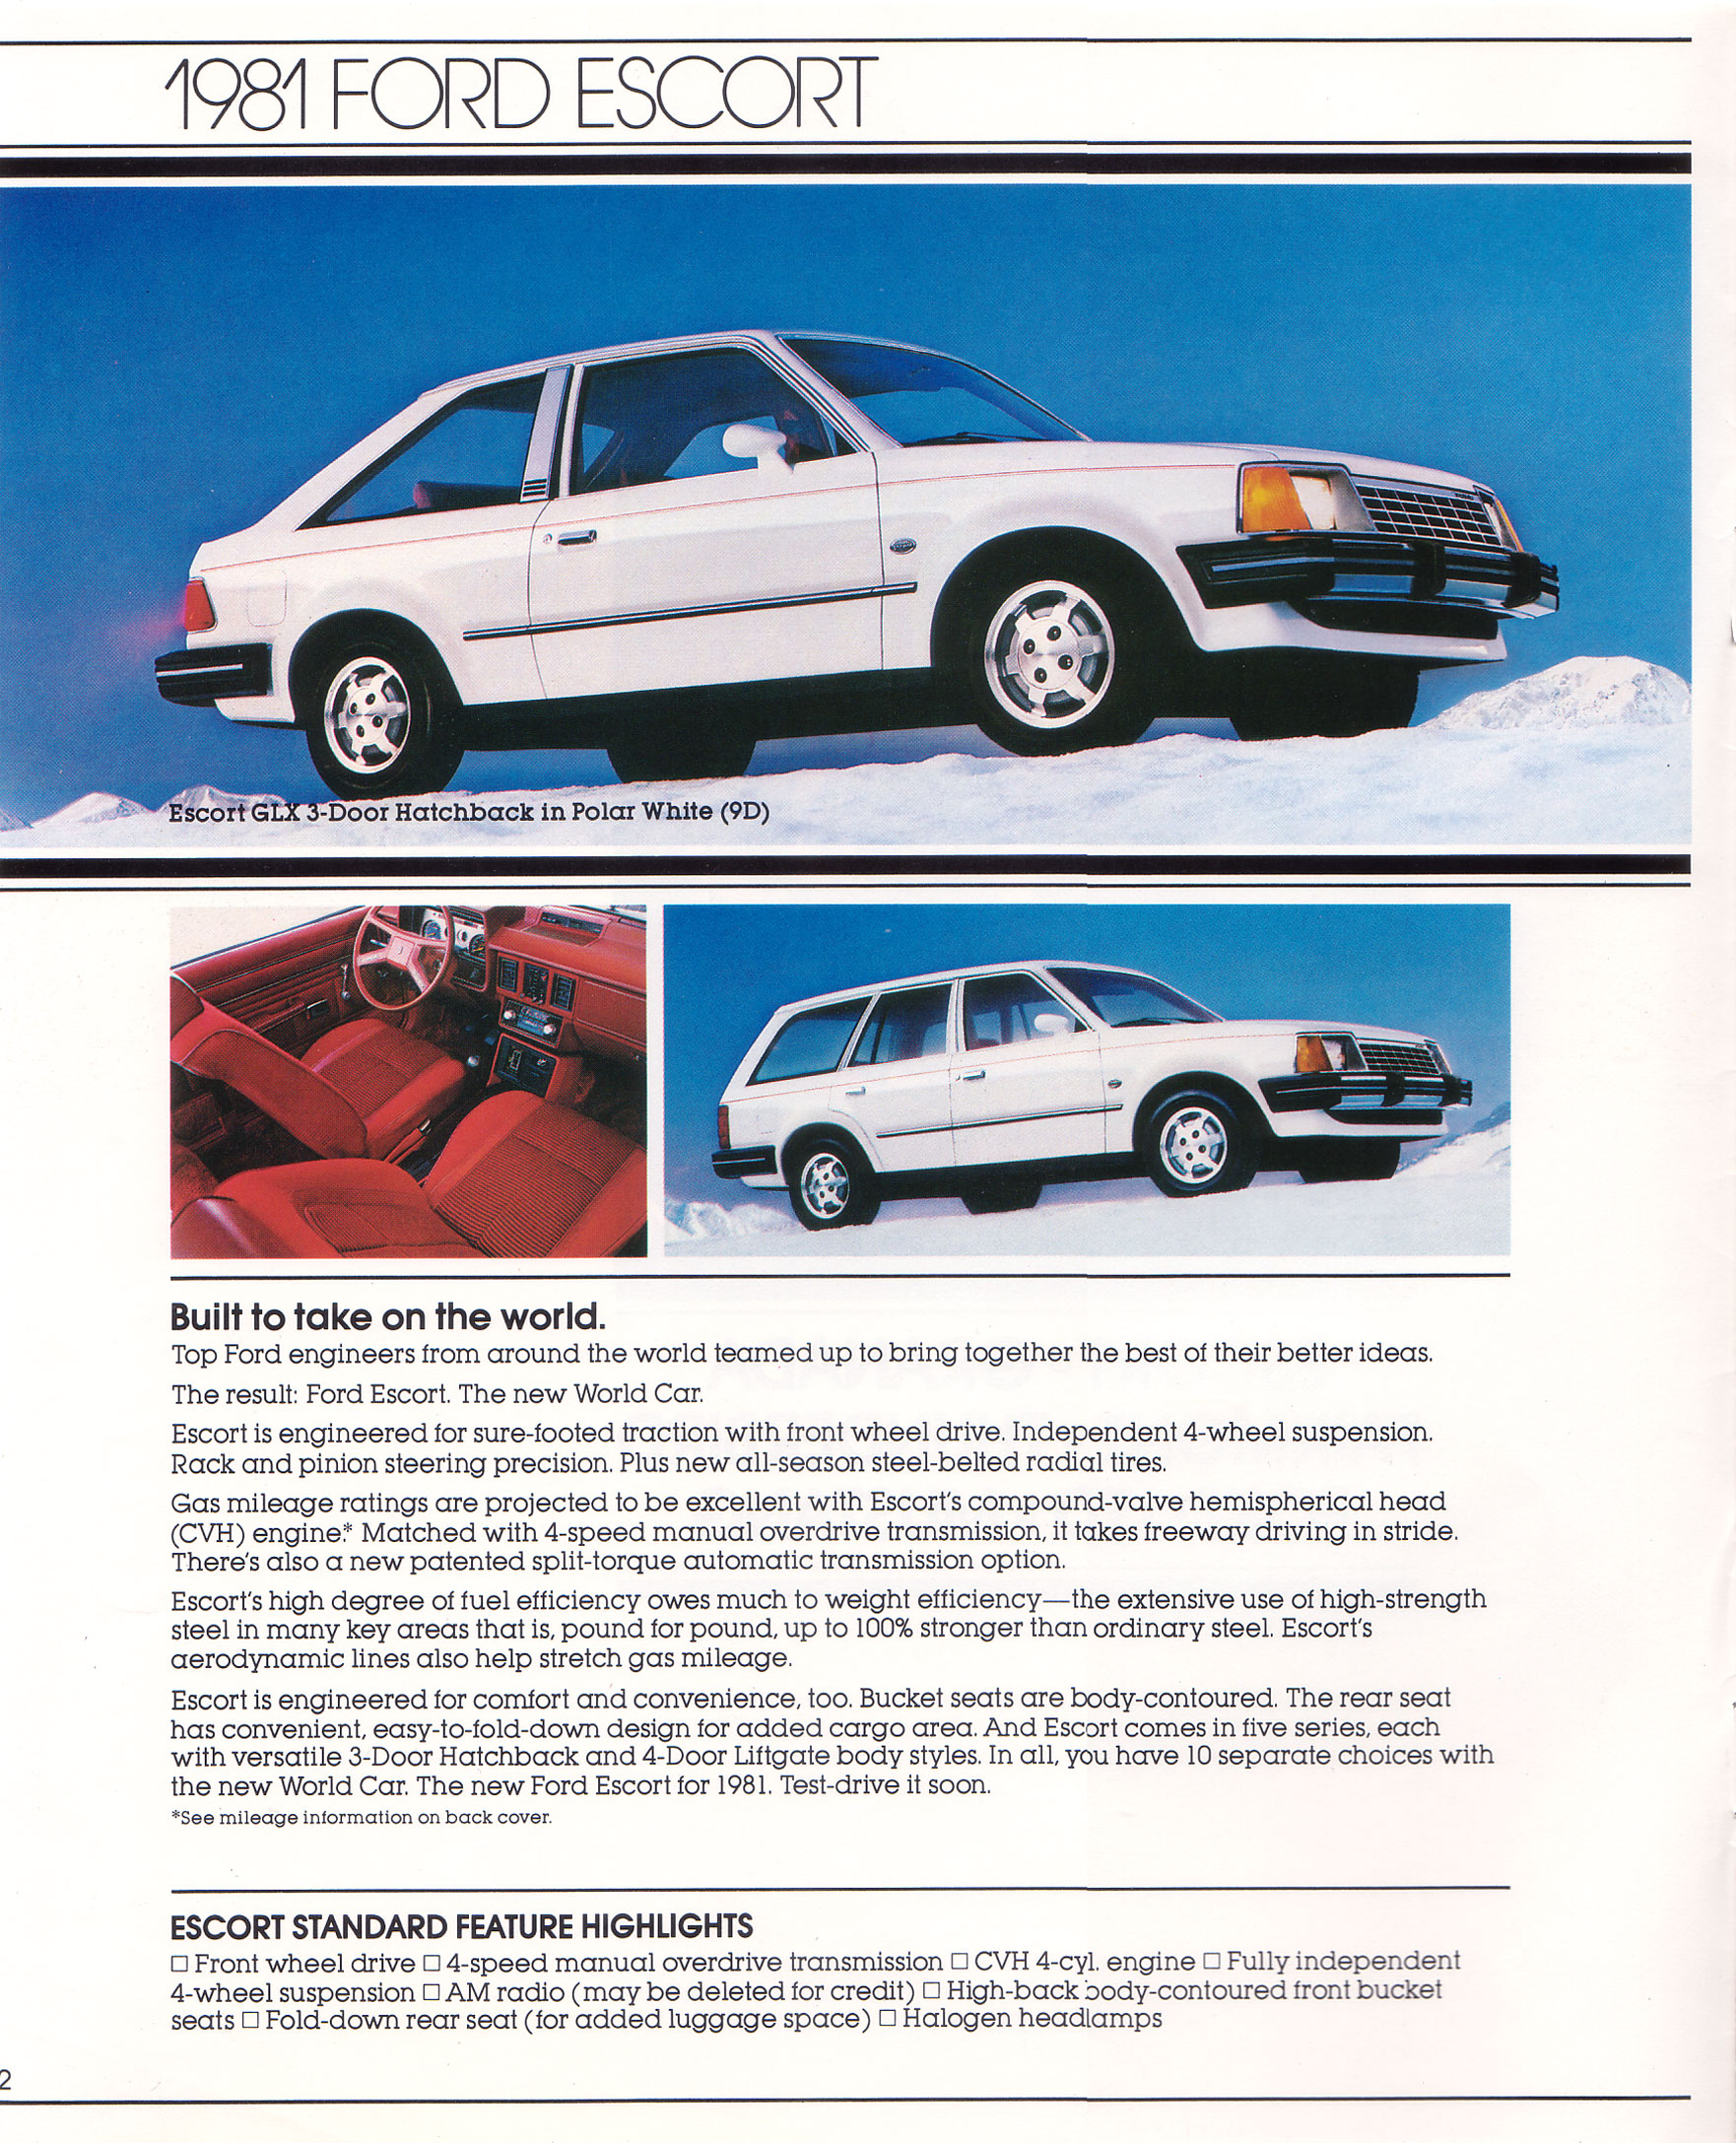 1981 Ford A World Of Better Ideas Brochure Page 3